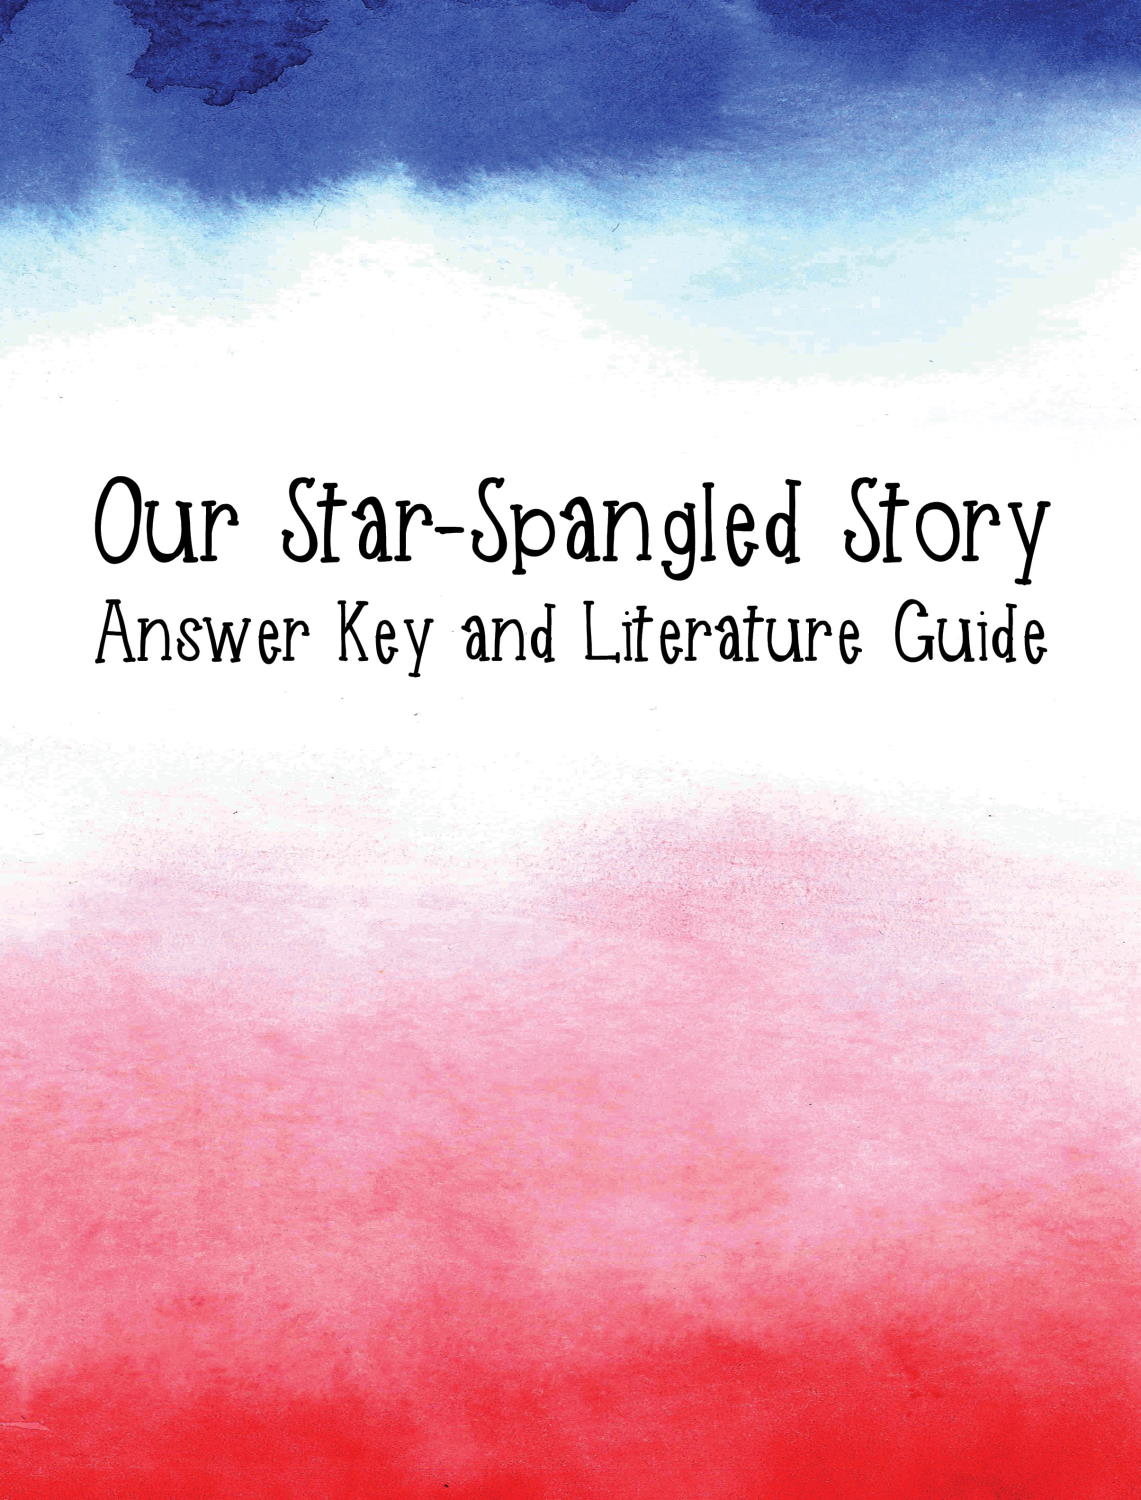 Our Star-Spangled Story Answer Key and Literature Guide